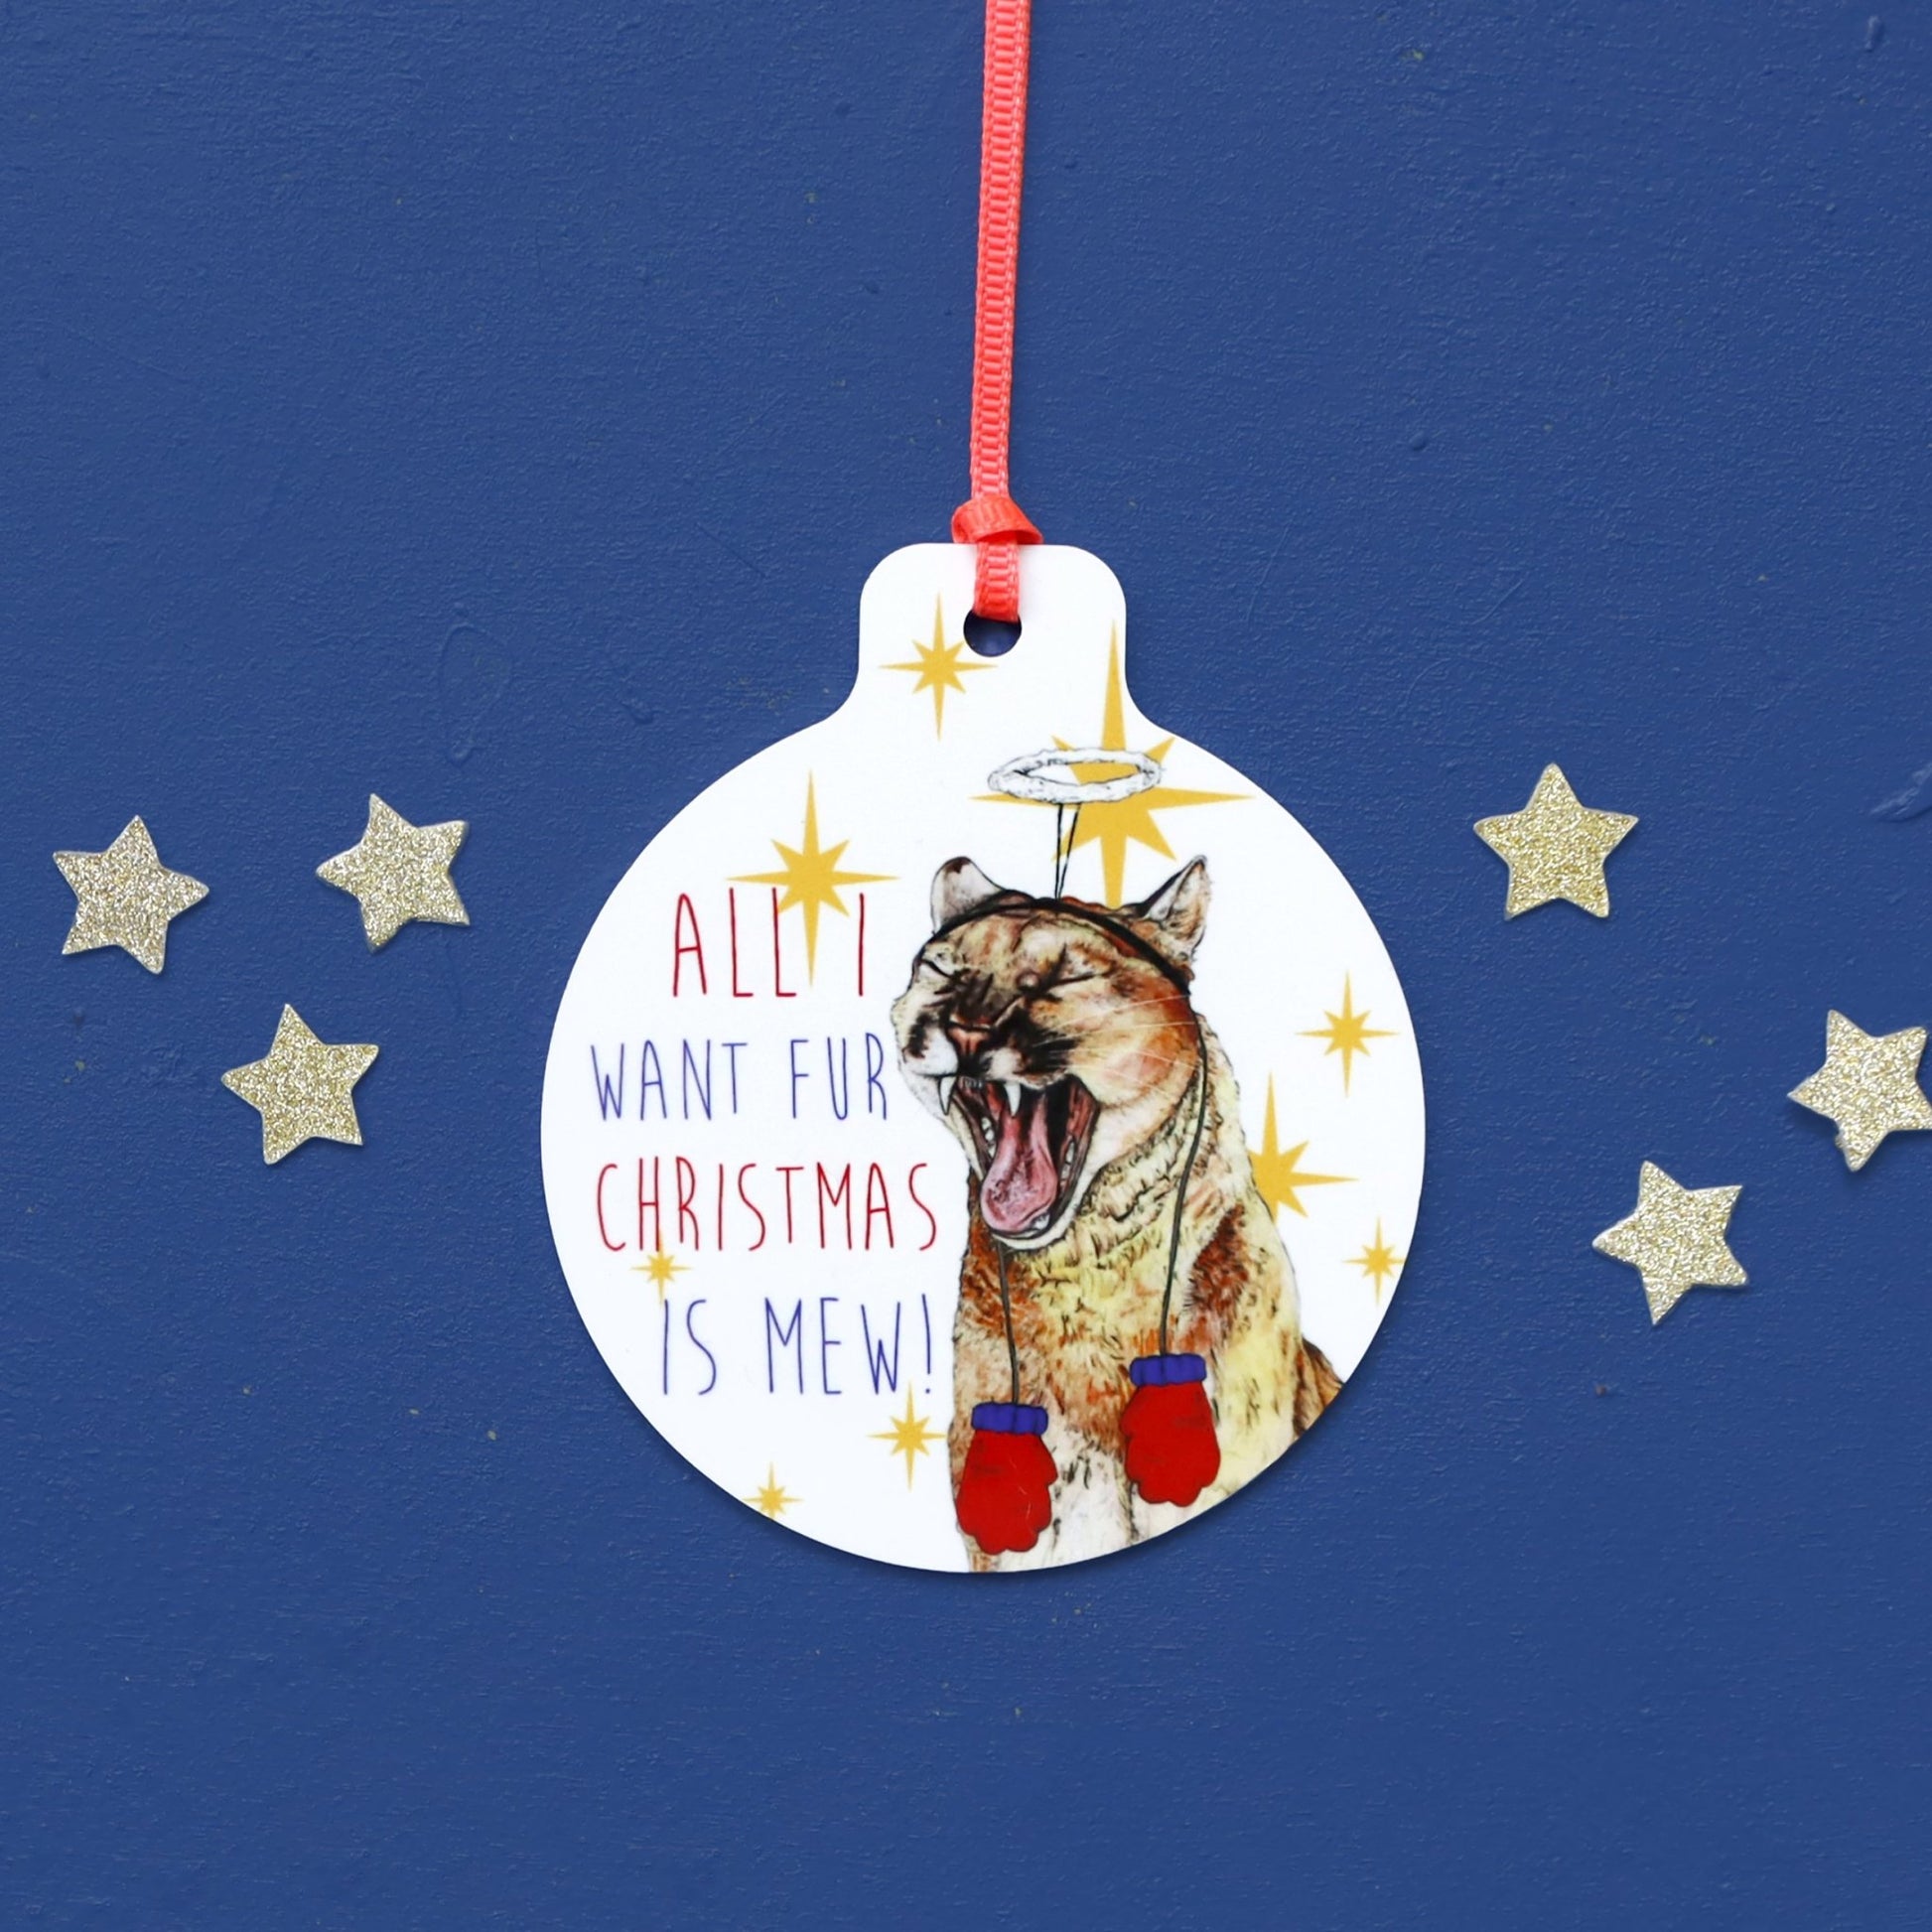 Cougar 'All I Want Fur Christmas' Christmas Tree Decoration - Fawn and Thistle